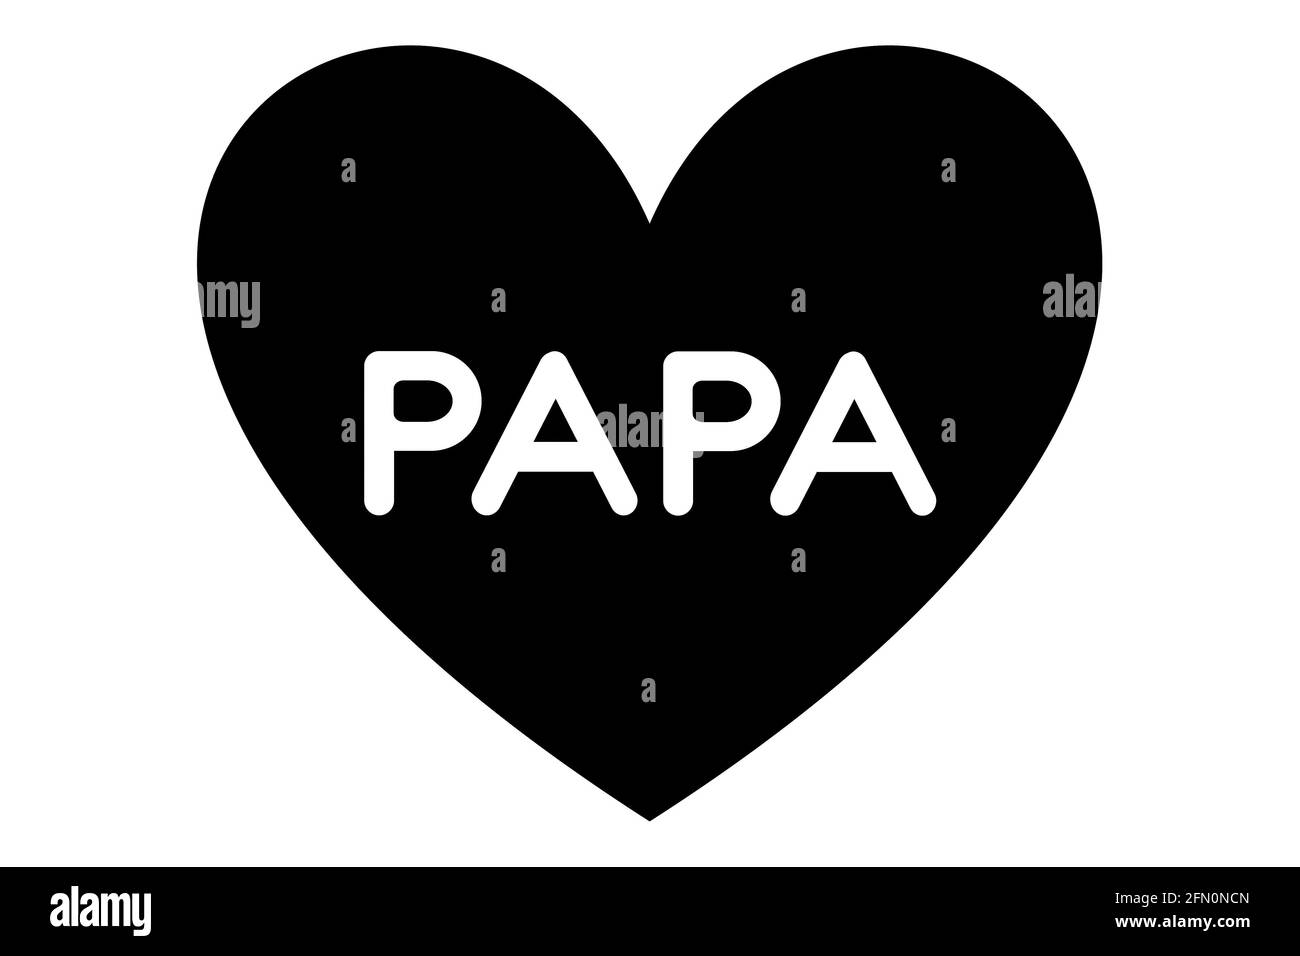 Black heart shape with white word 'PAPA' for Father's Day concept. Stock Photo